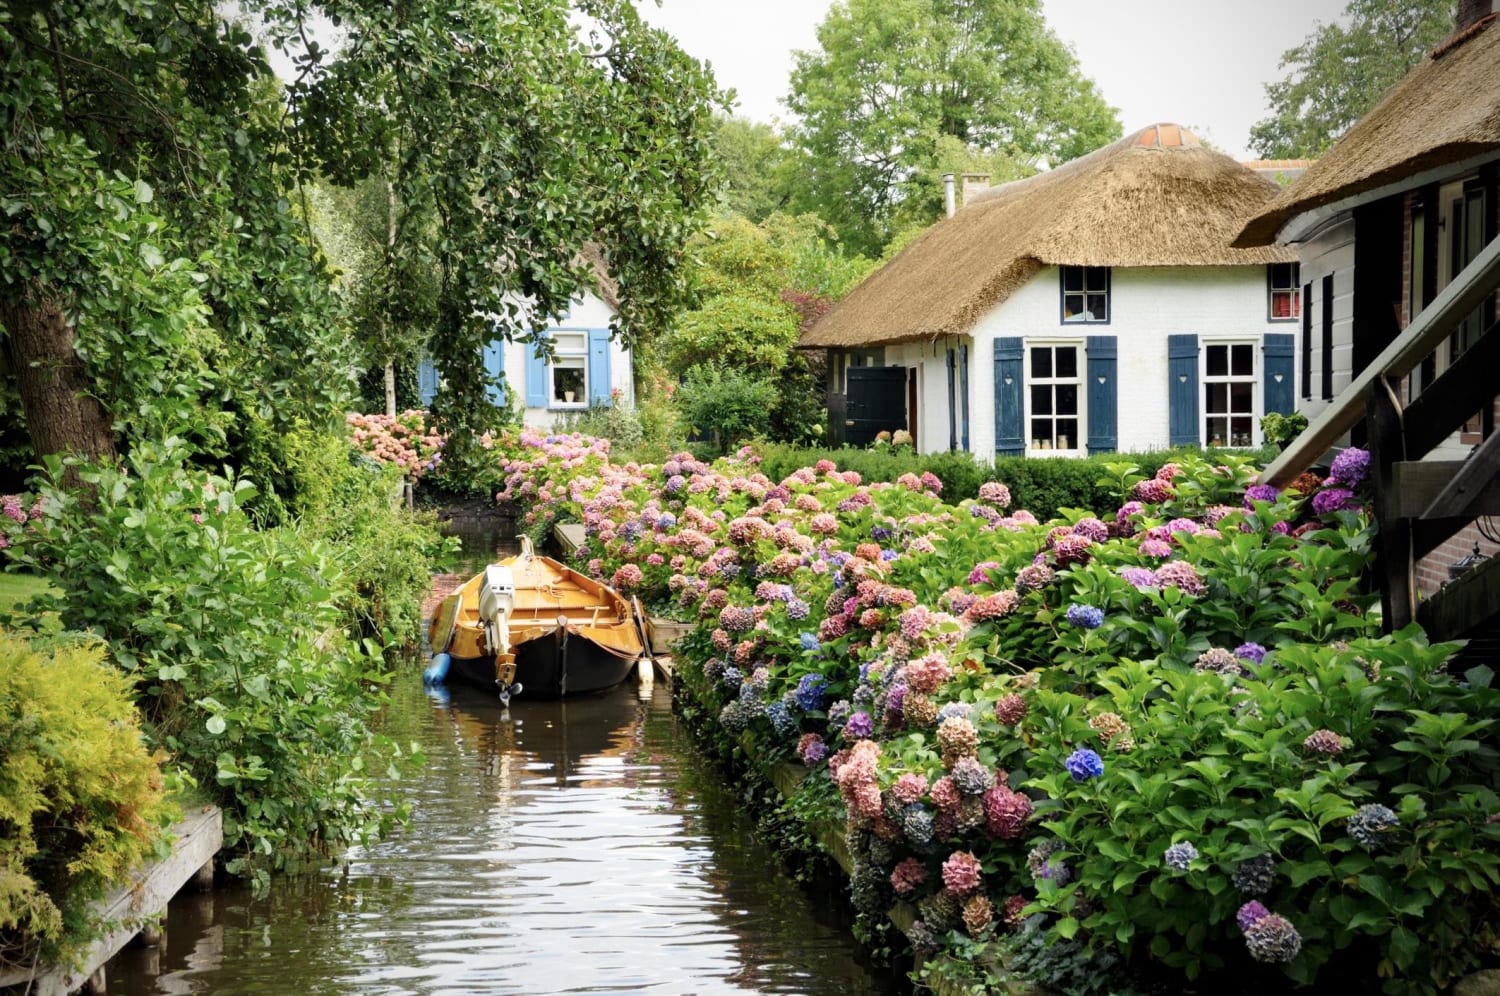 Cozy living in the Netherlands